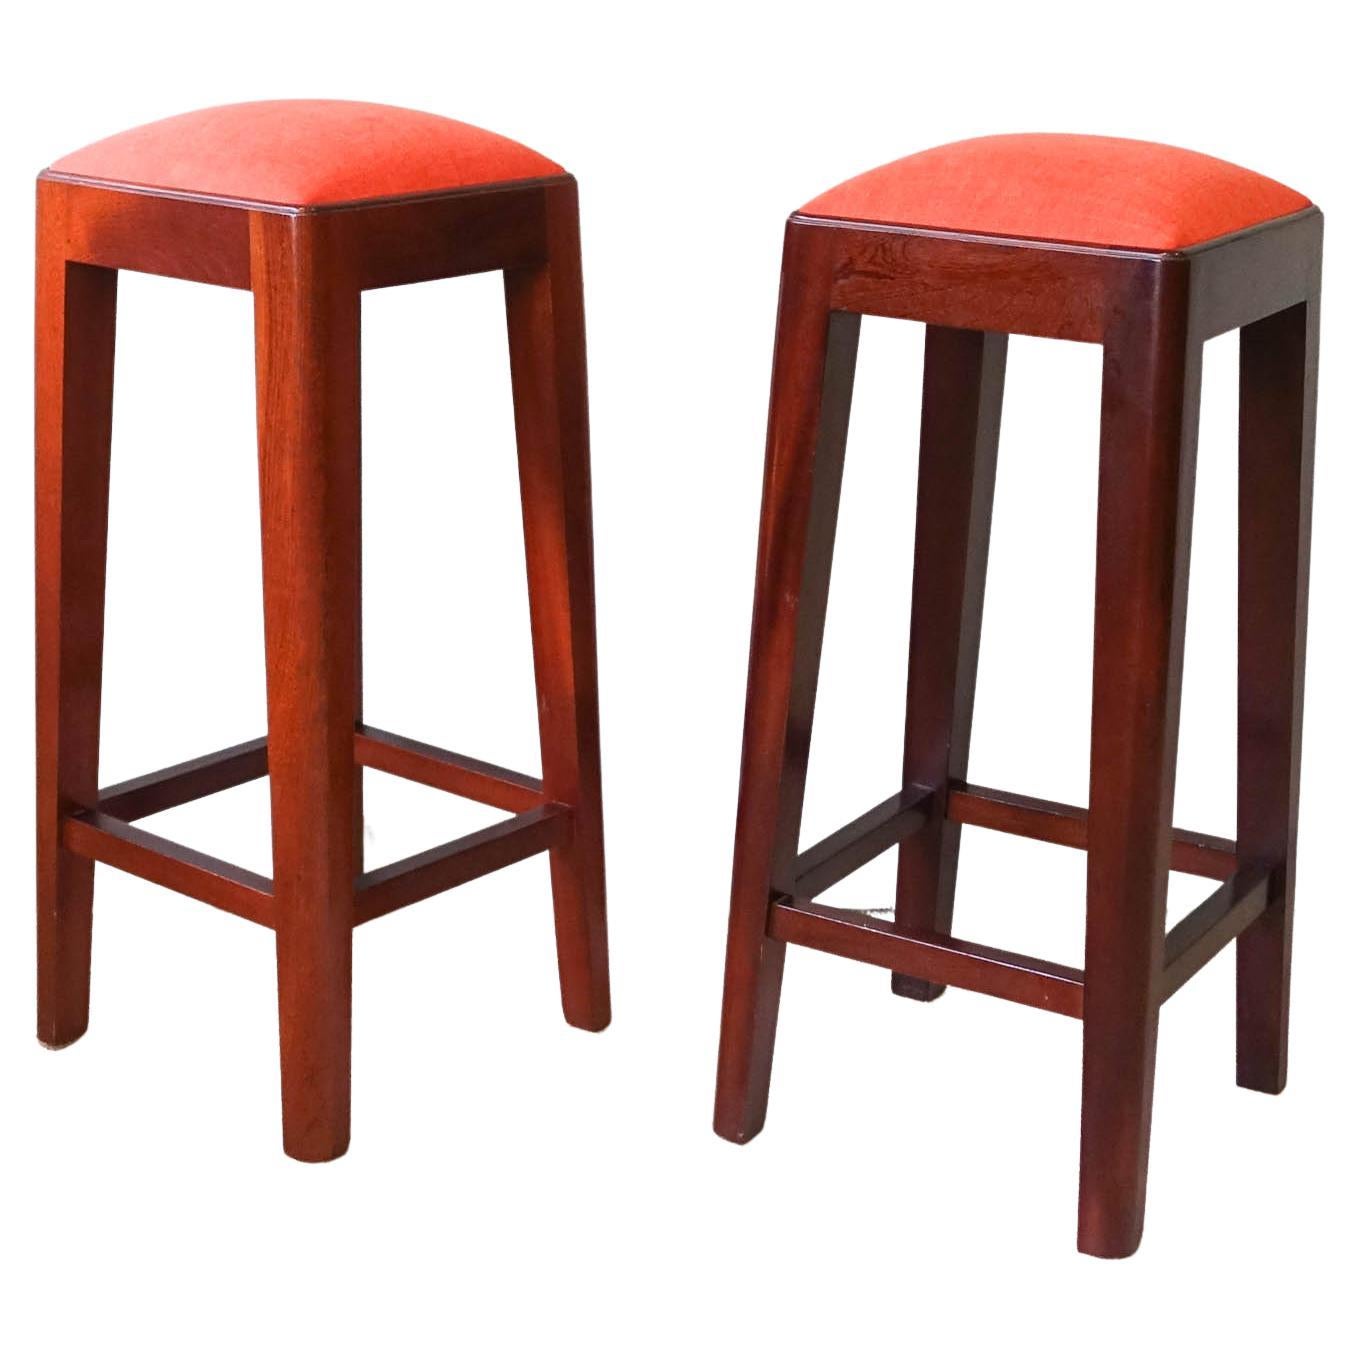 Pair of Vintage Portuguese High Stools, 1960's For Sale